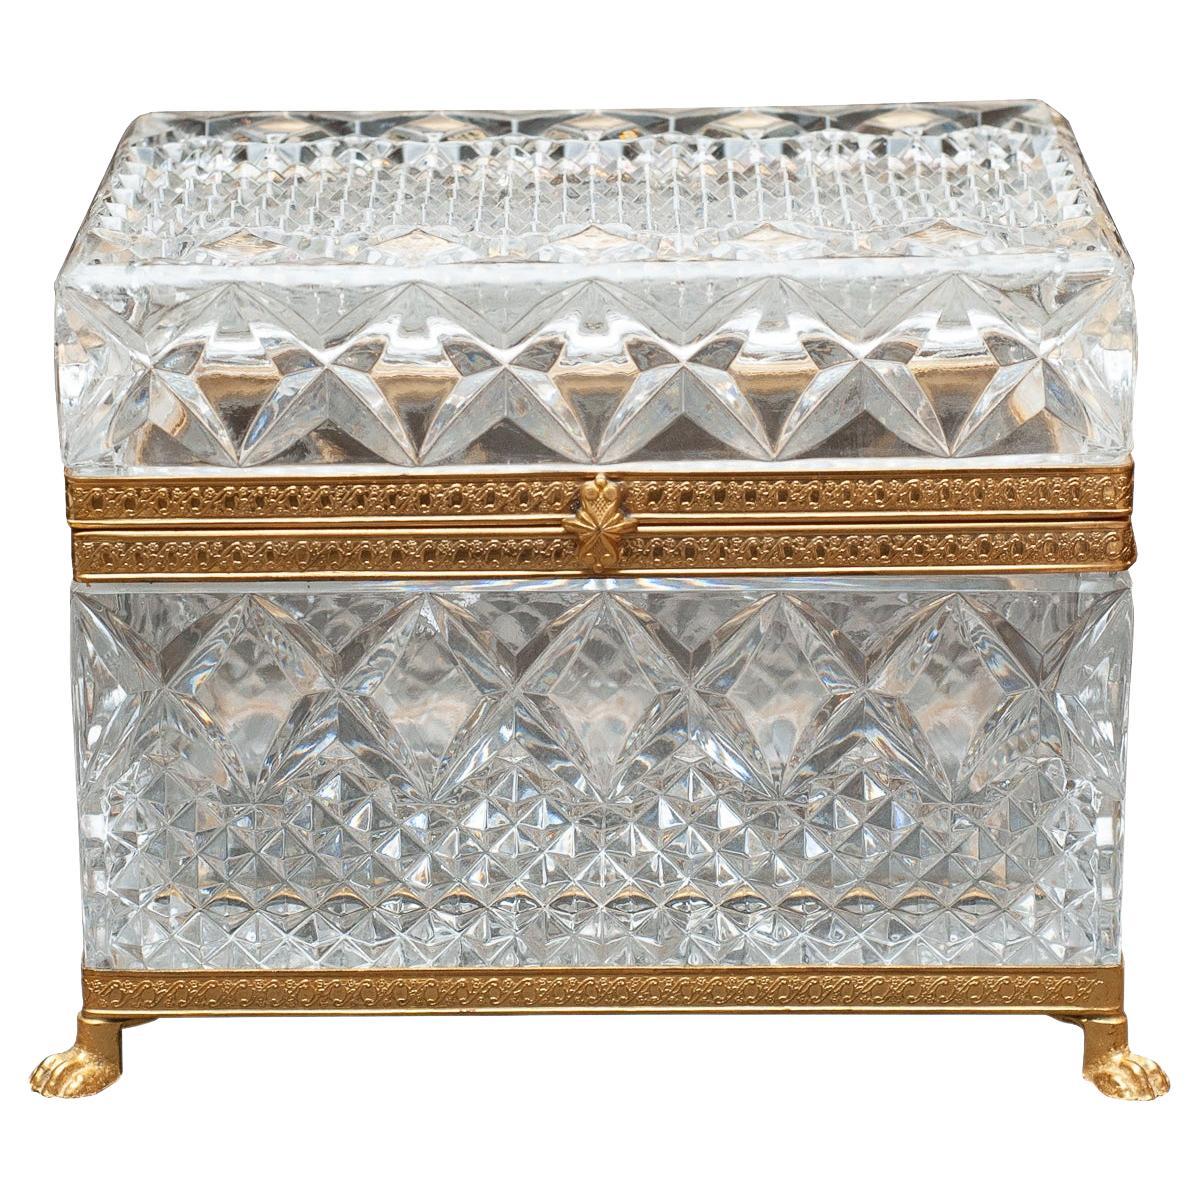 Antique French Cut Crystal Hinged Box with Bronze Mounts For Sale